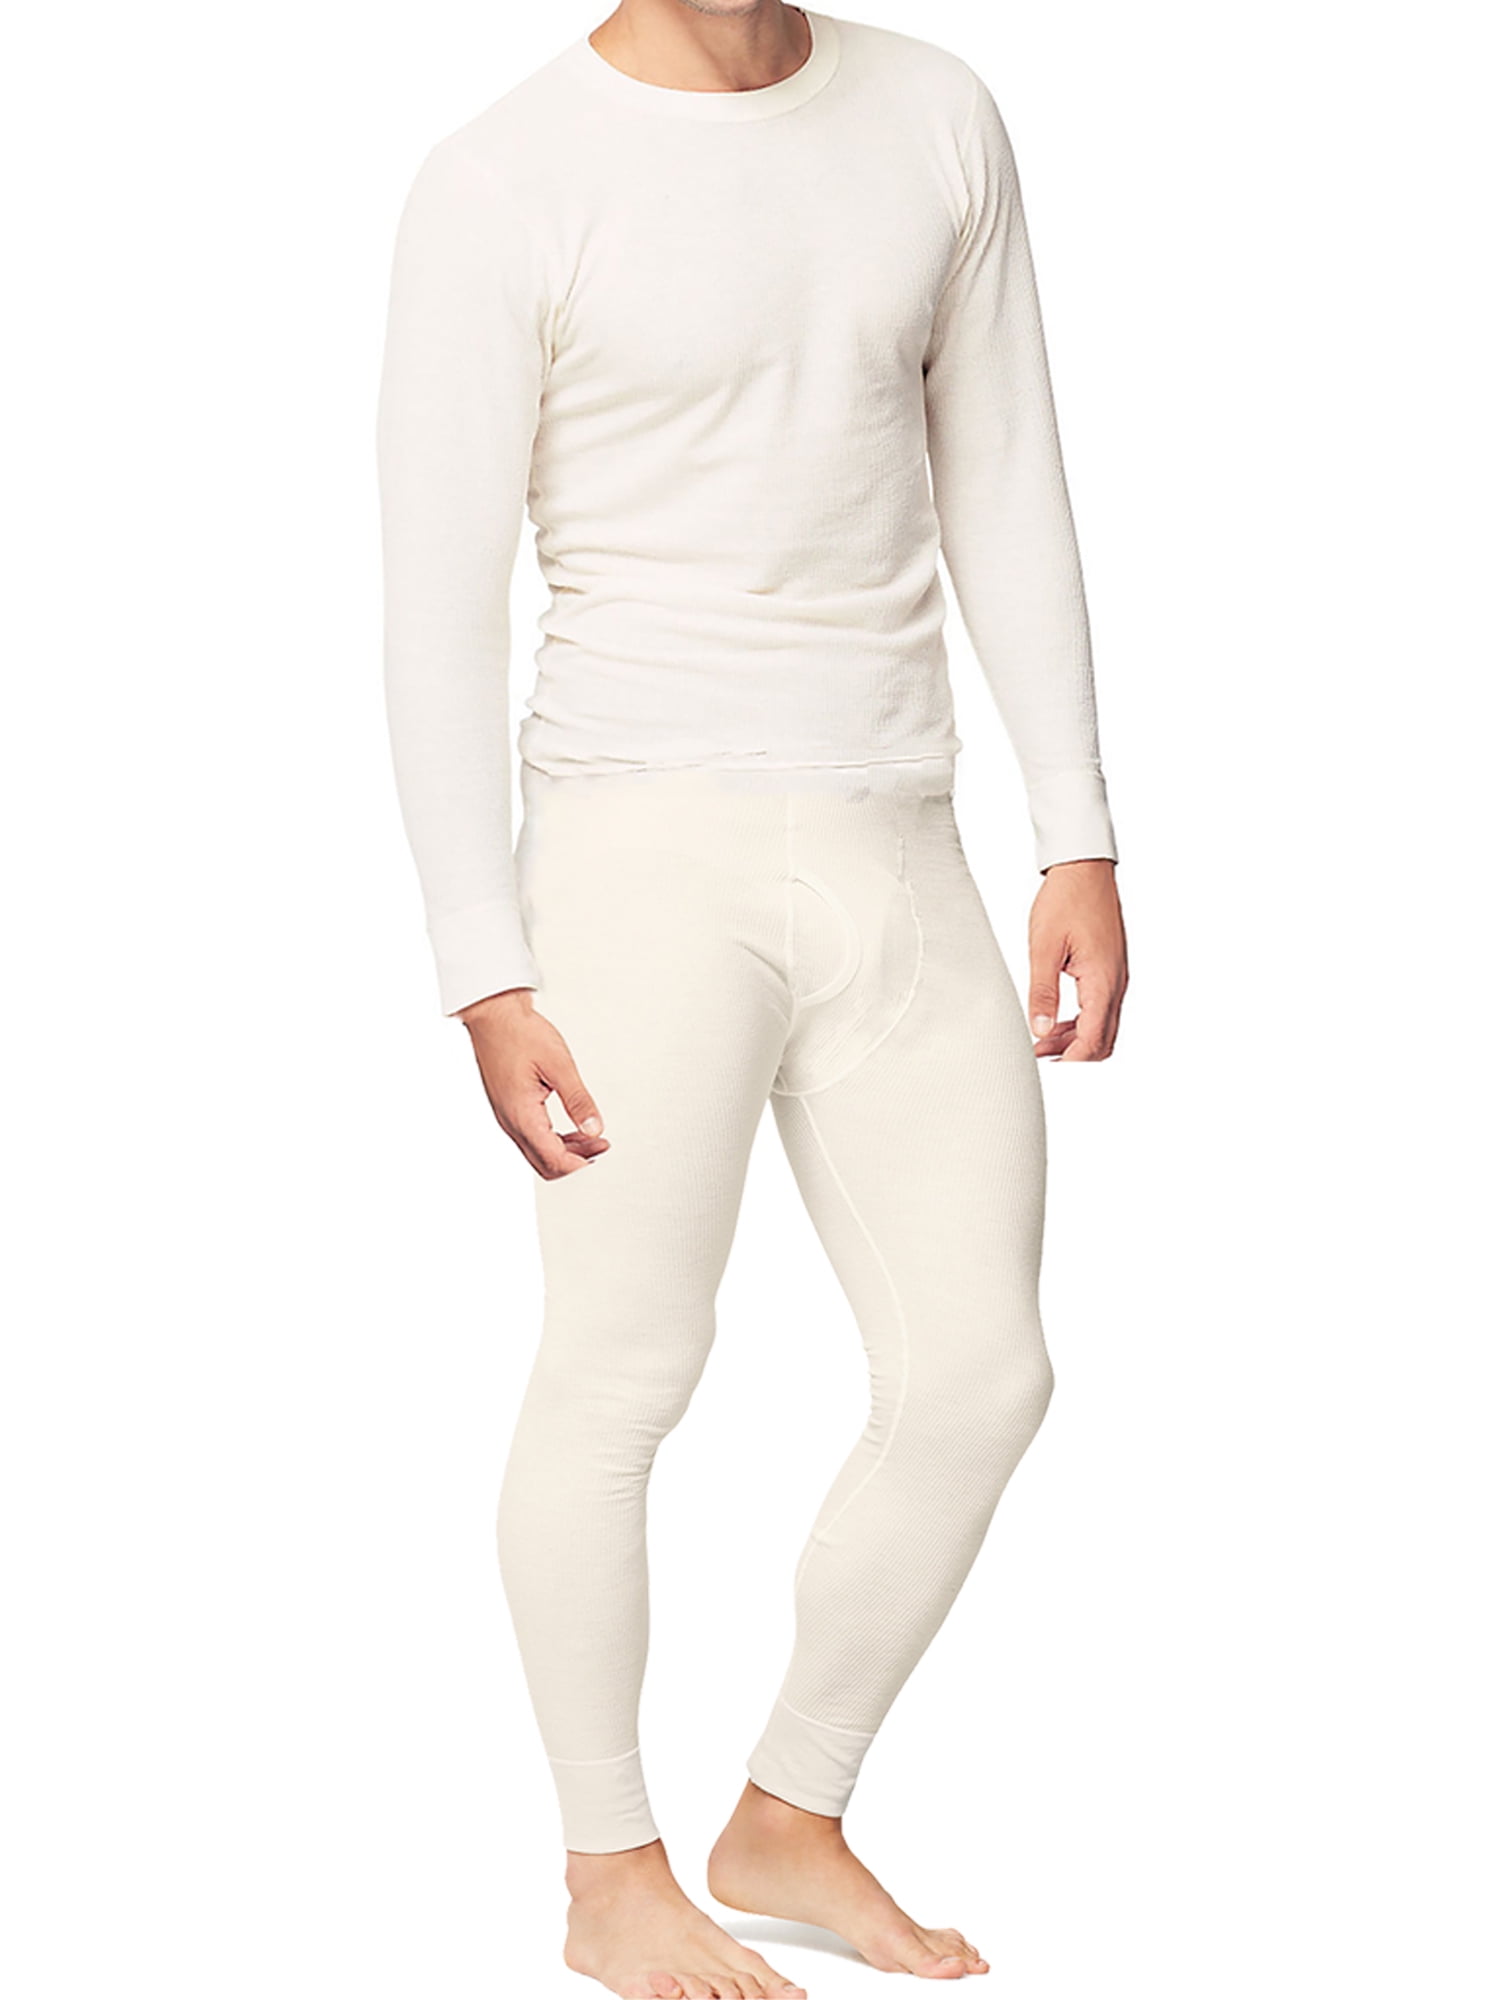 Wholesale Adult One Piece Long Johns For Intimate Warmth And Comfort 